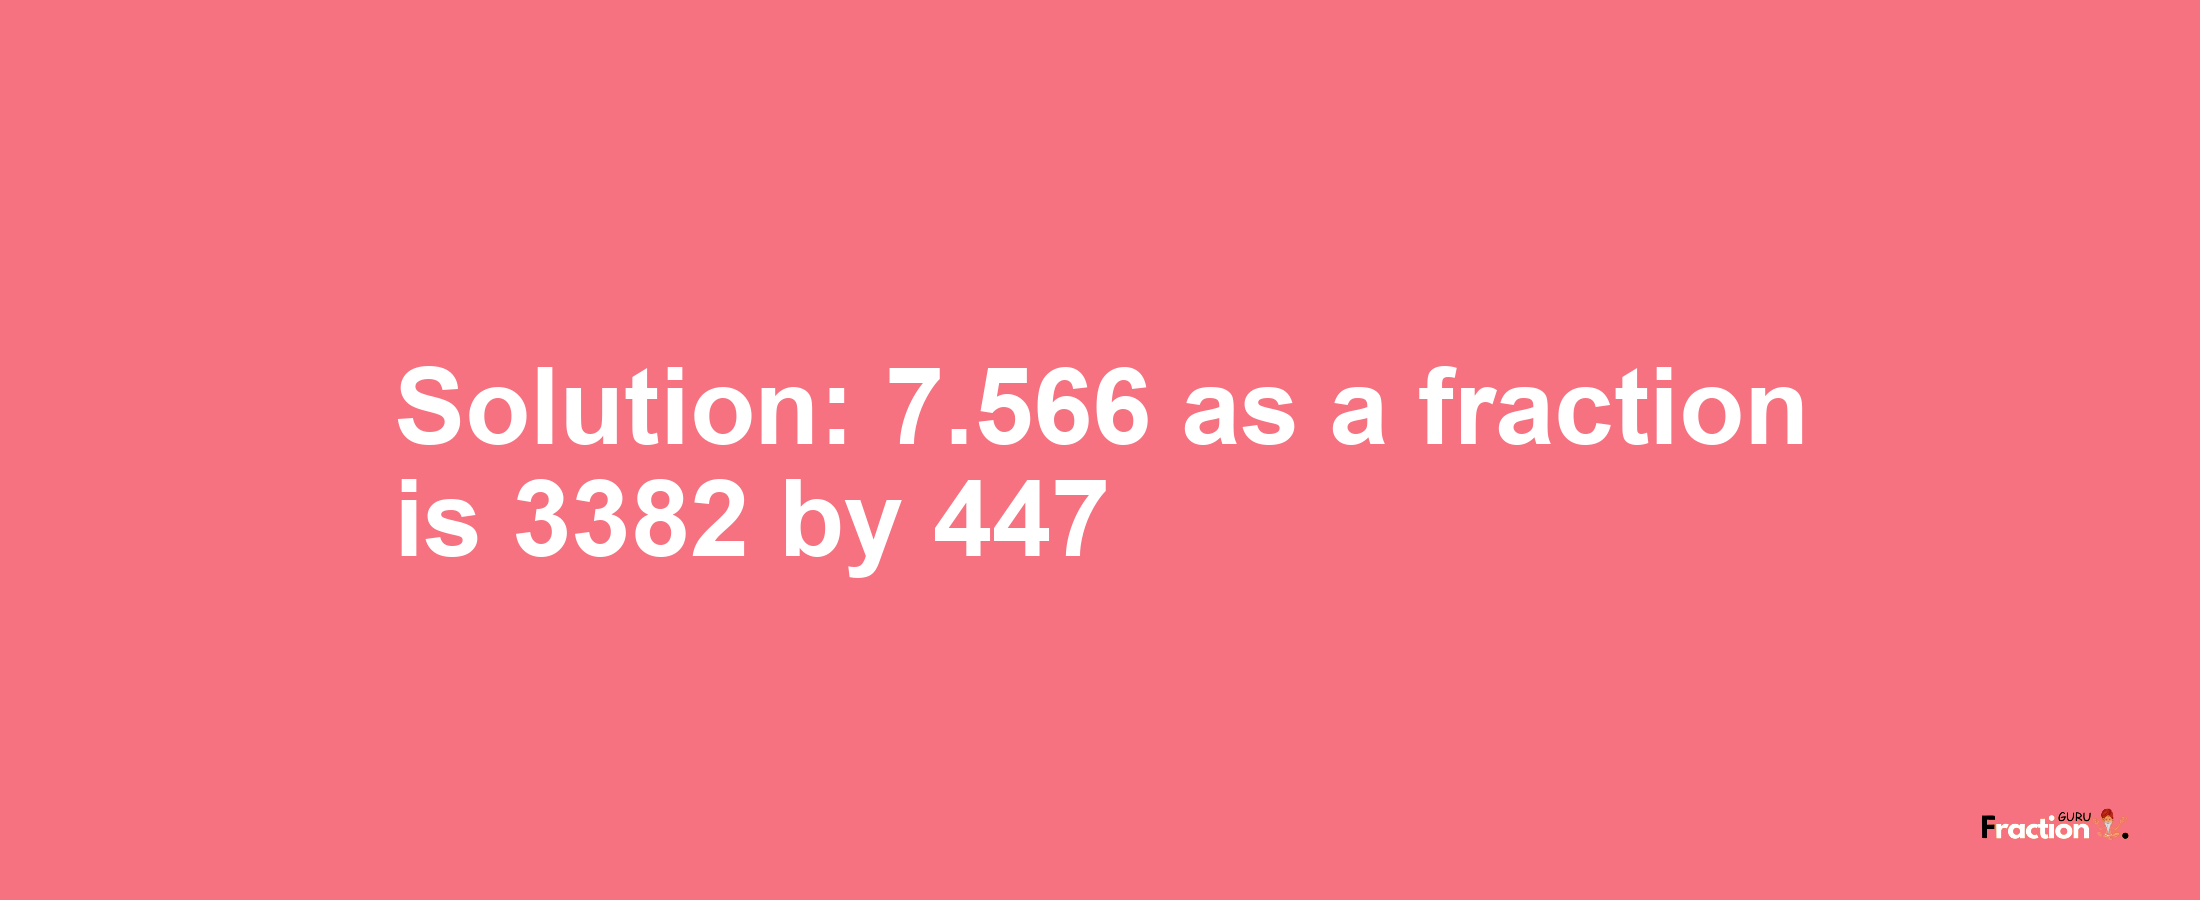 Solution:7.566 as a fraction is 3382/447